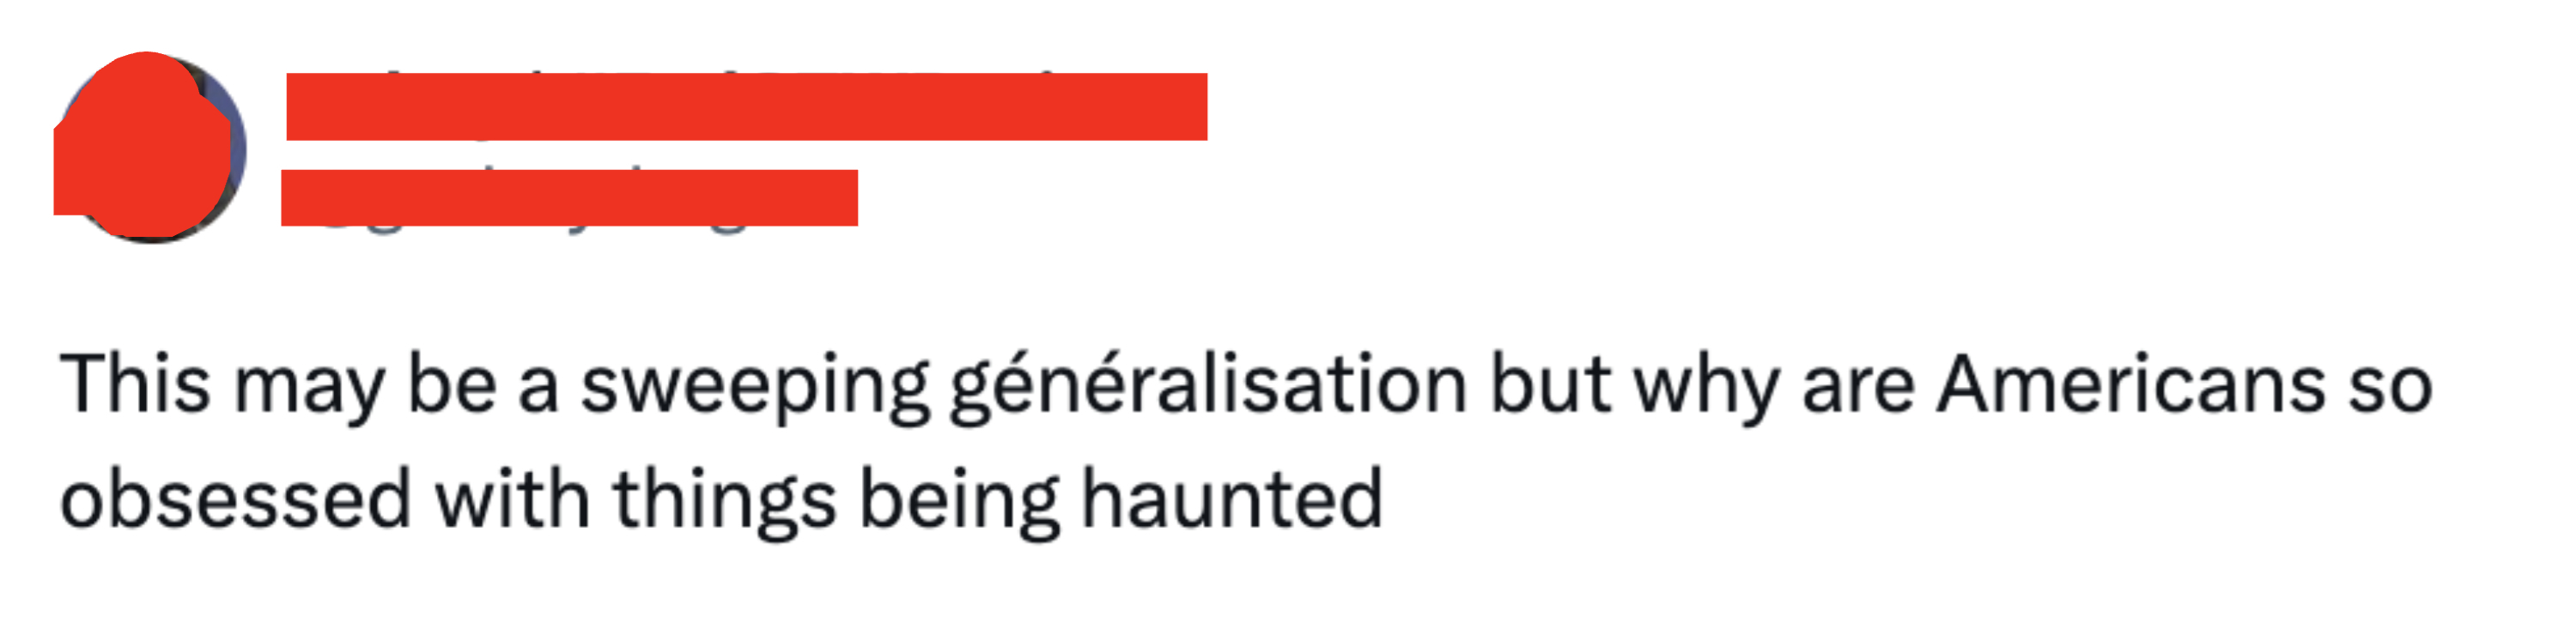 This may be a sweeping generalization but why are Americans so obsessed with things being haunted